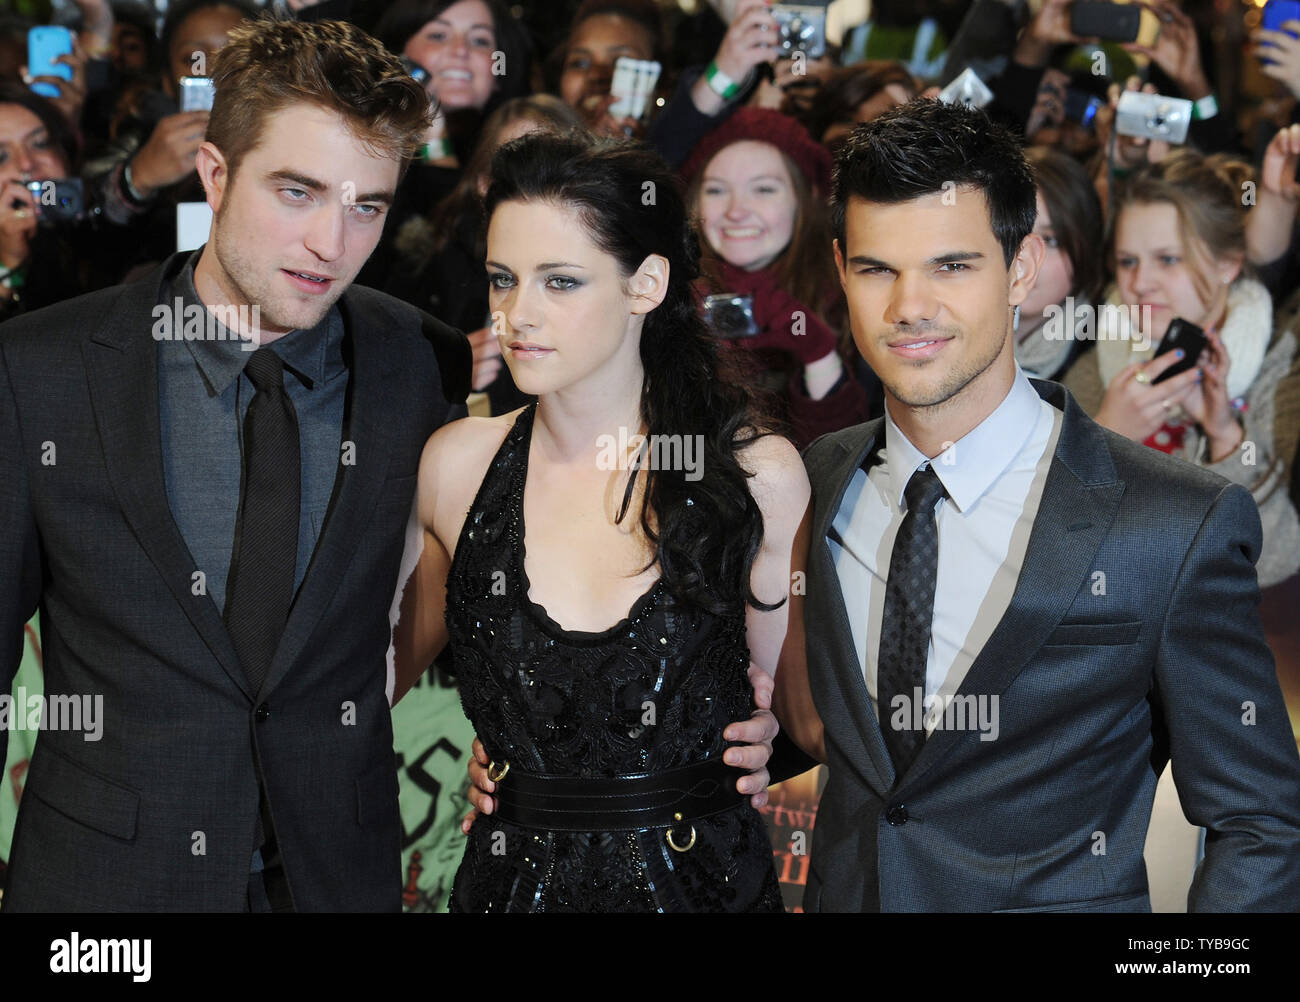 Actors and actresses twilight The Real